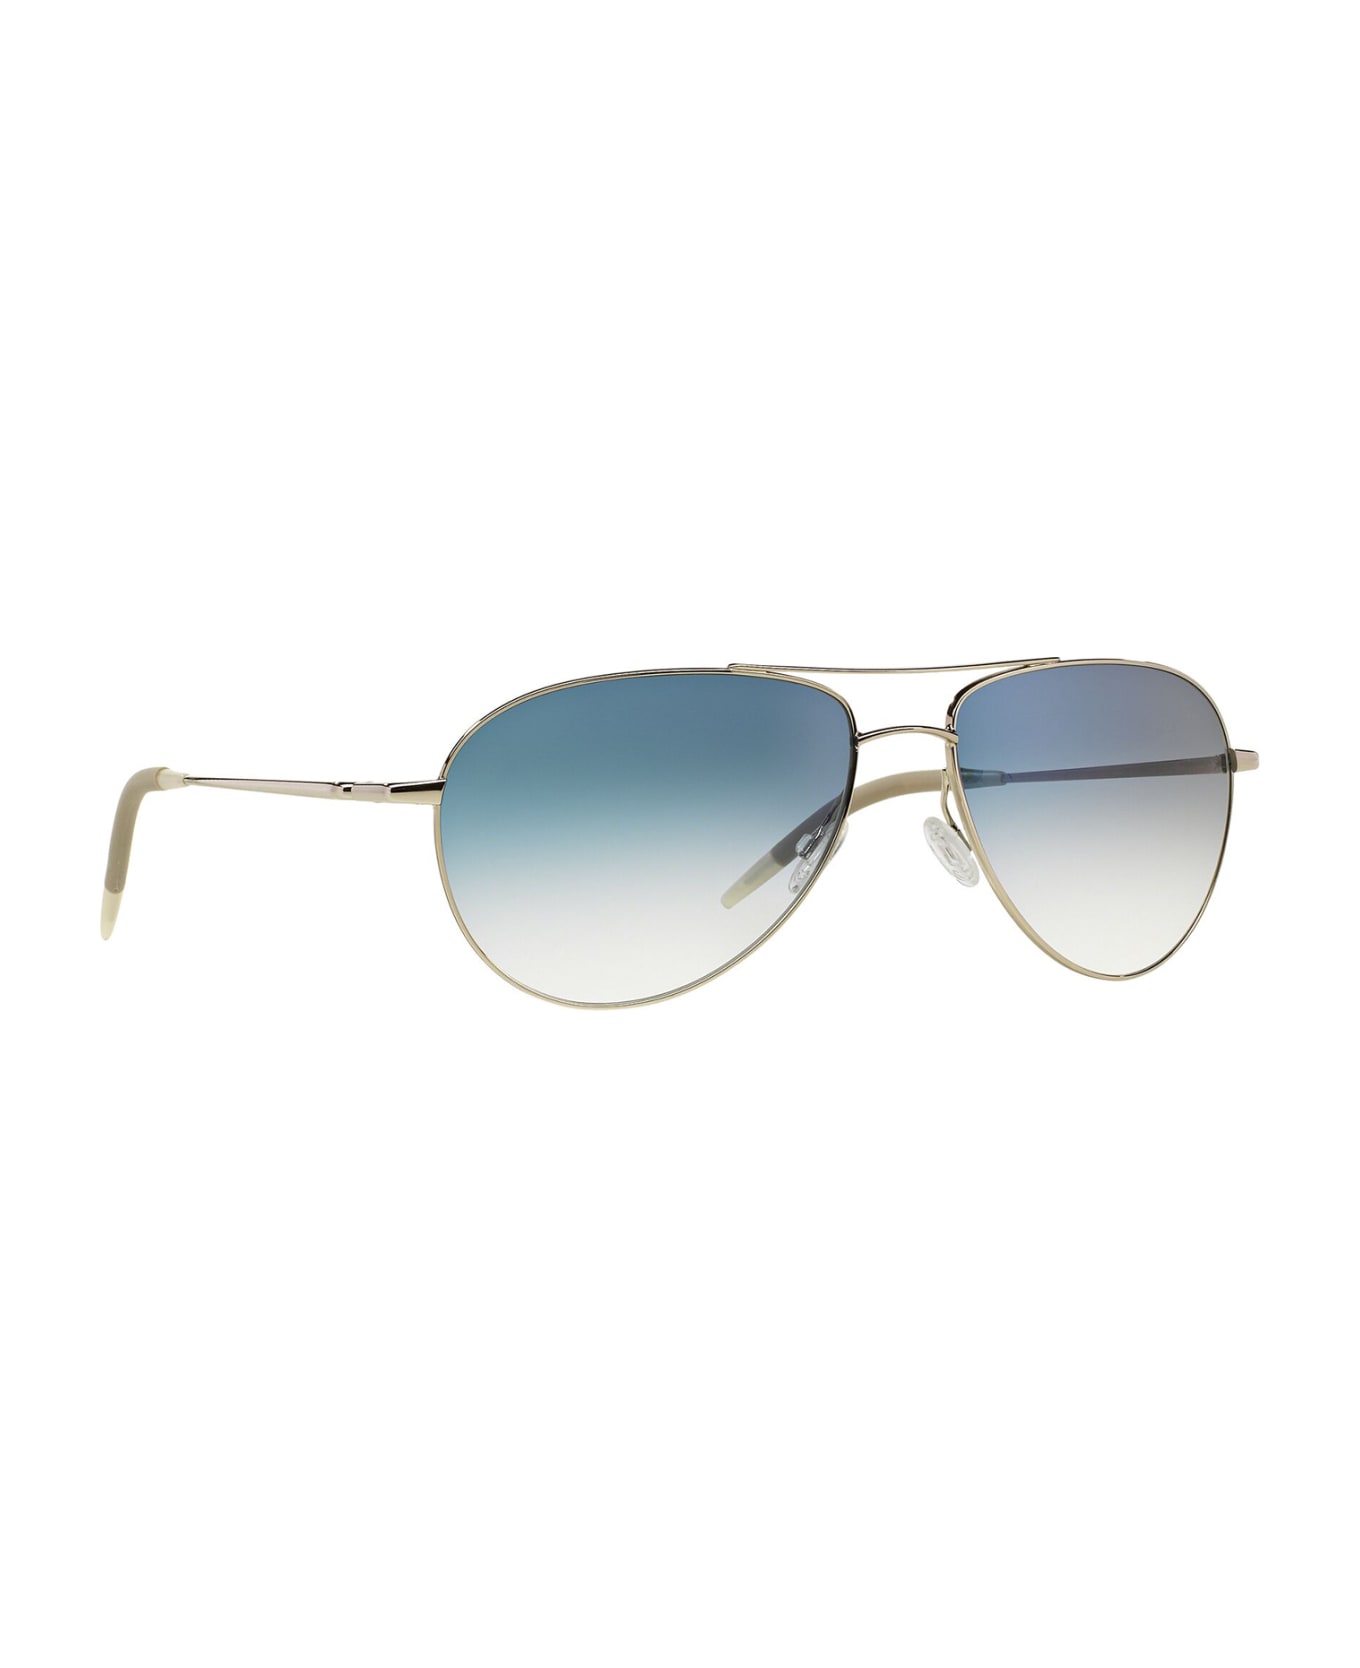 Oliver Peoples Ov1002s Silver Sunglasses - Silver サングラス